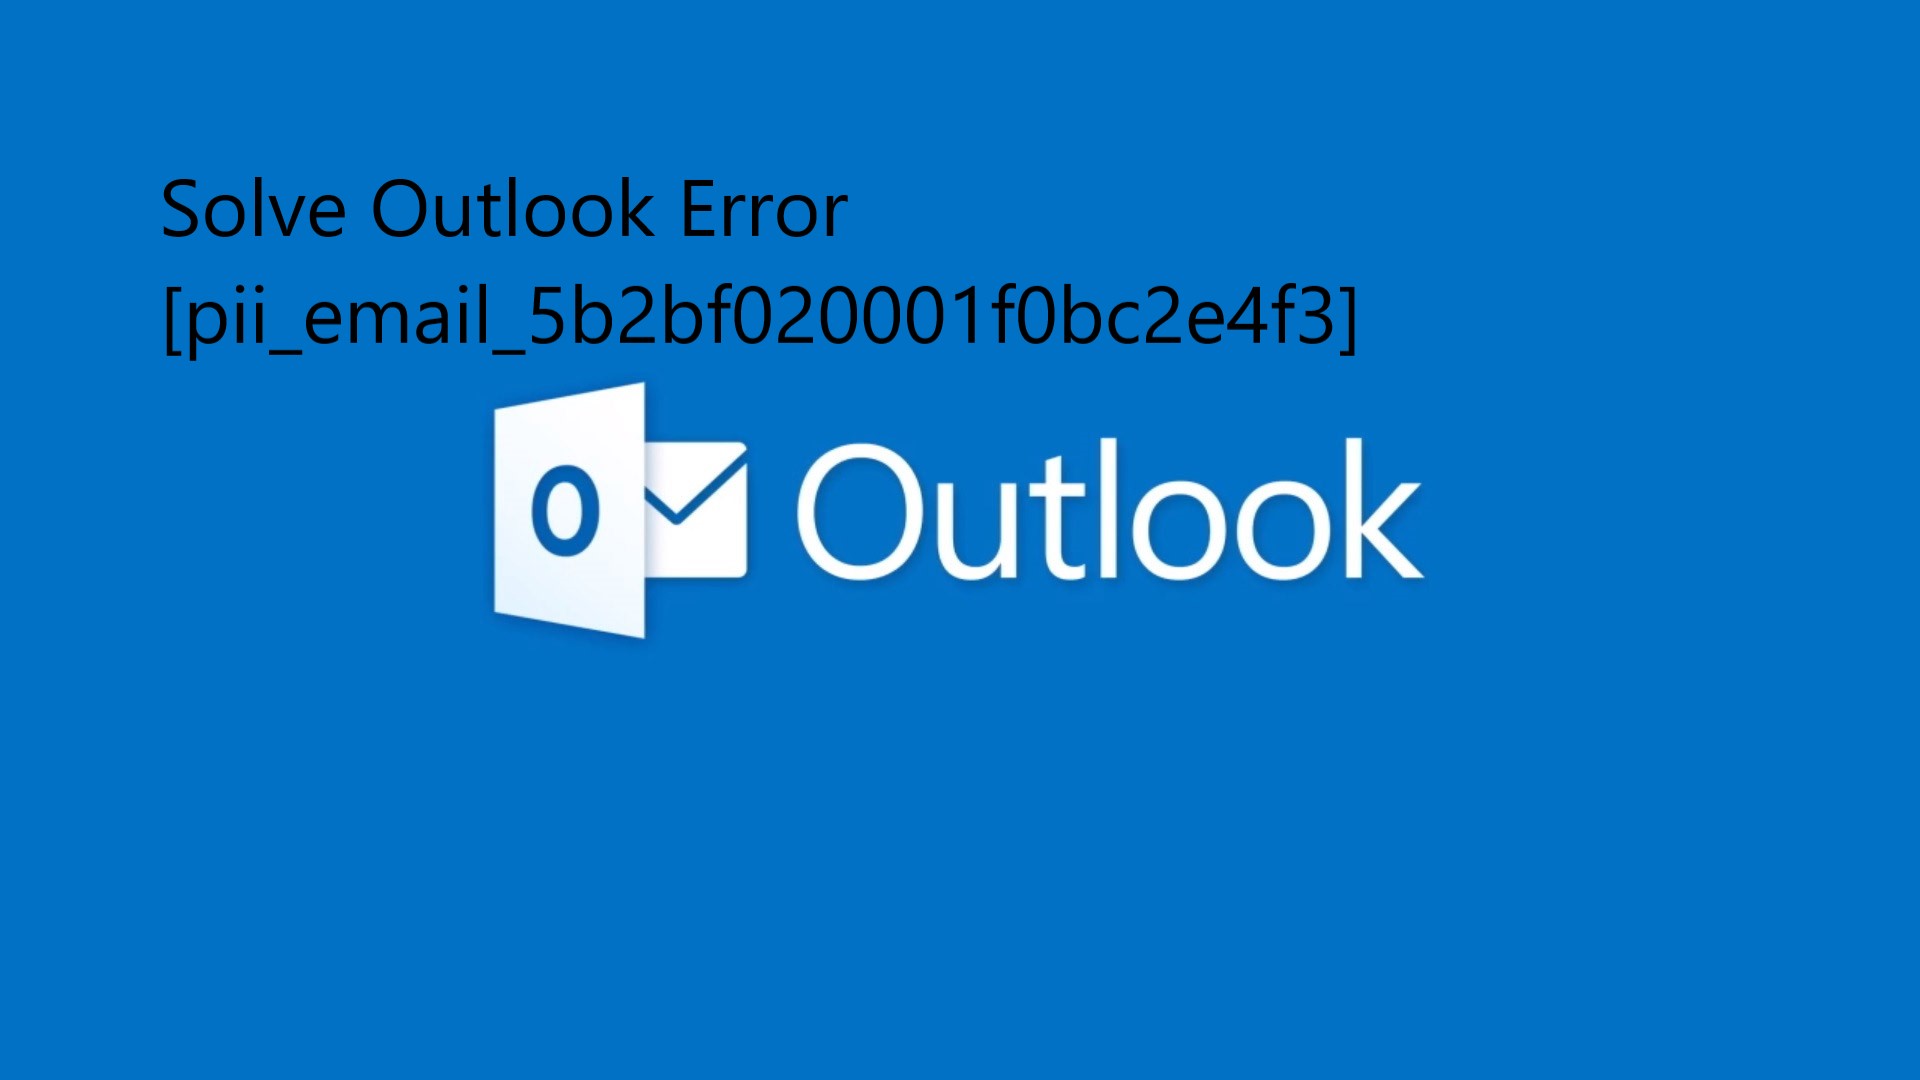 Solve Outlook Error [pii_email_5b2bf020001f0bc2e4f3]